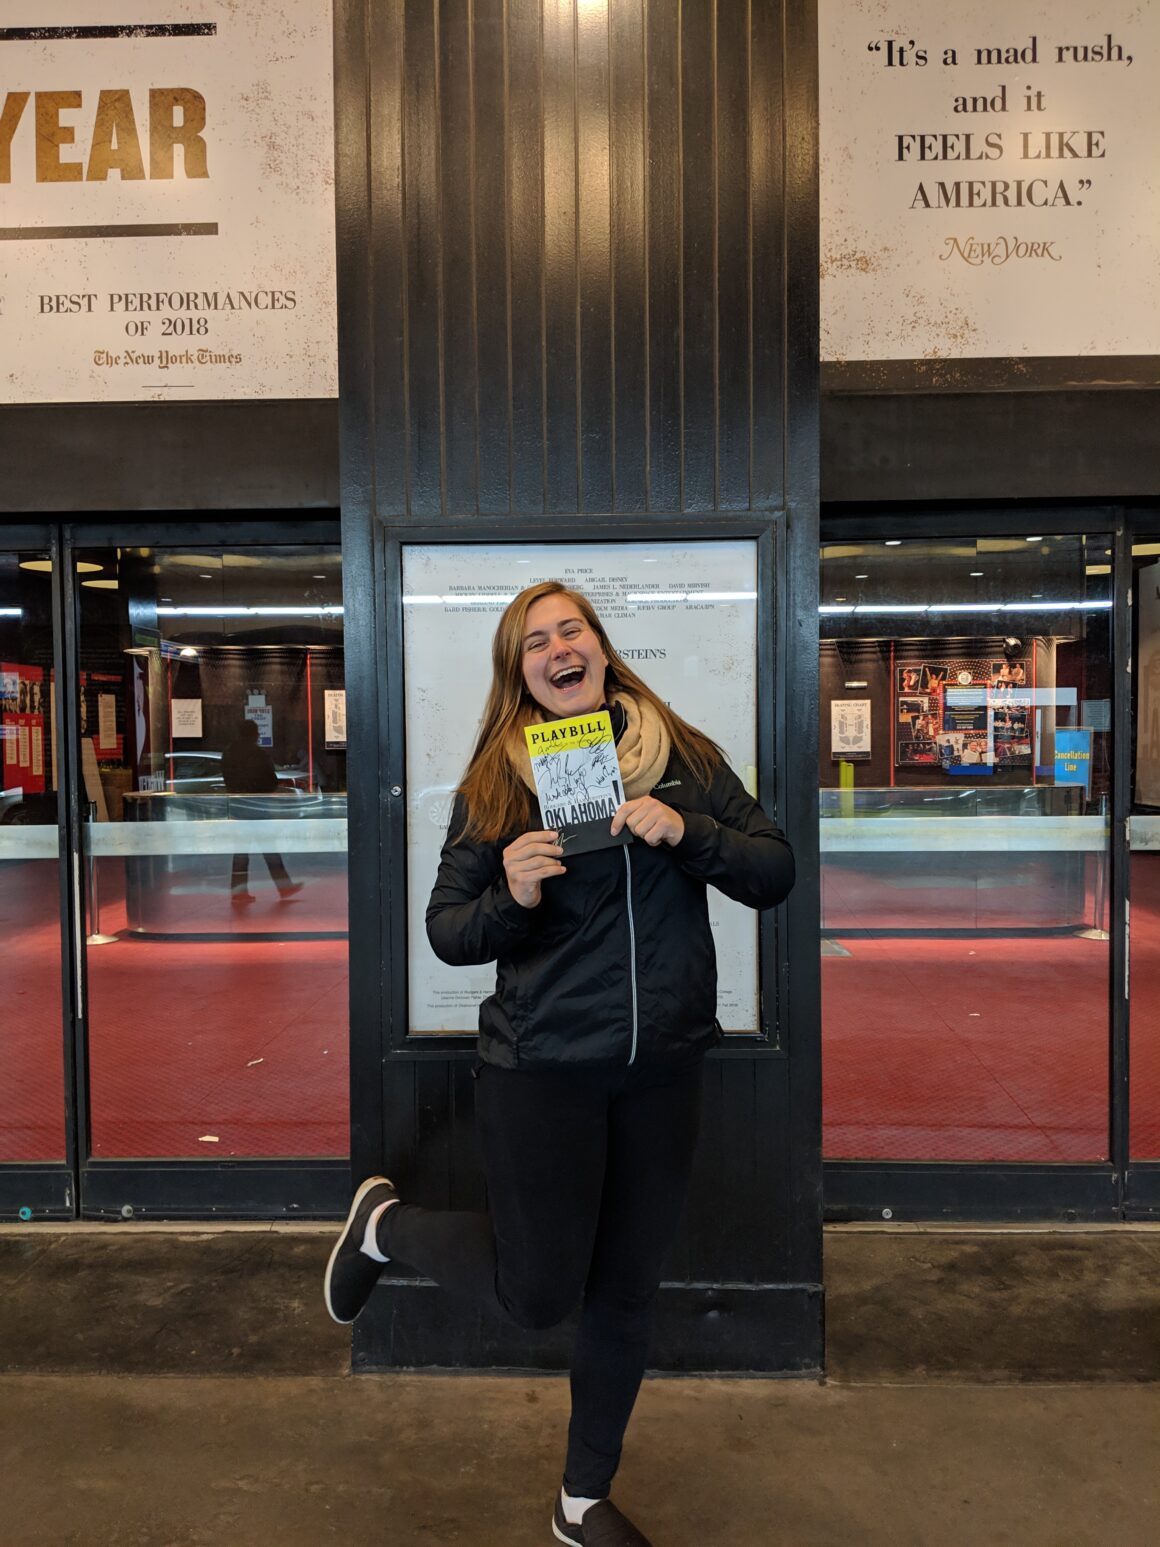 A girl holds a Playbill in front of a Broadway theater